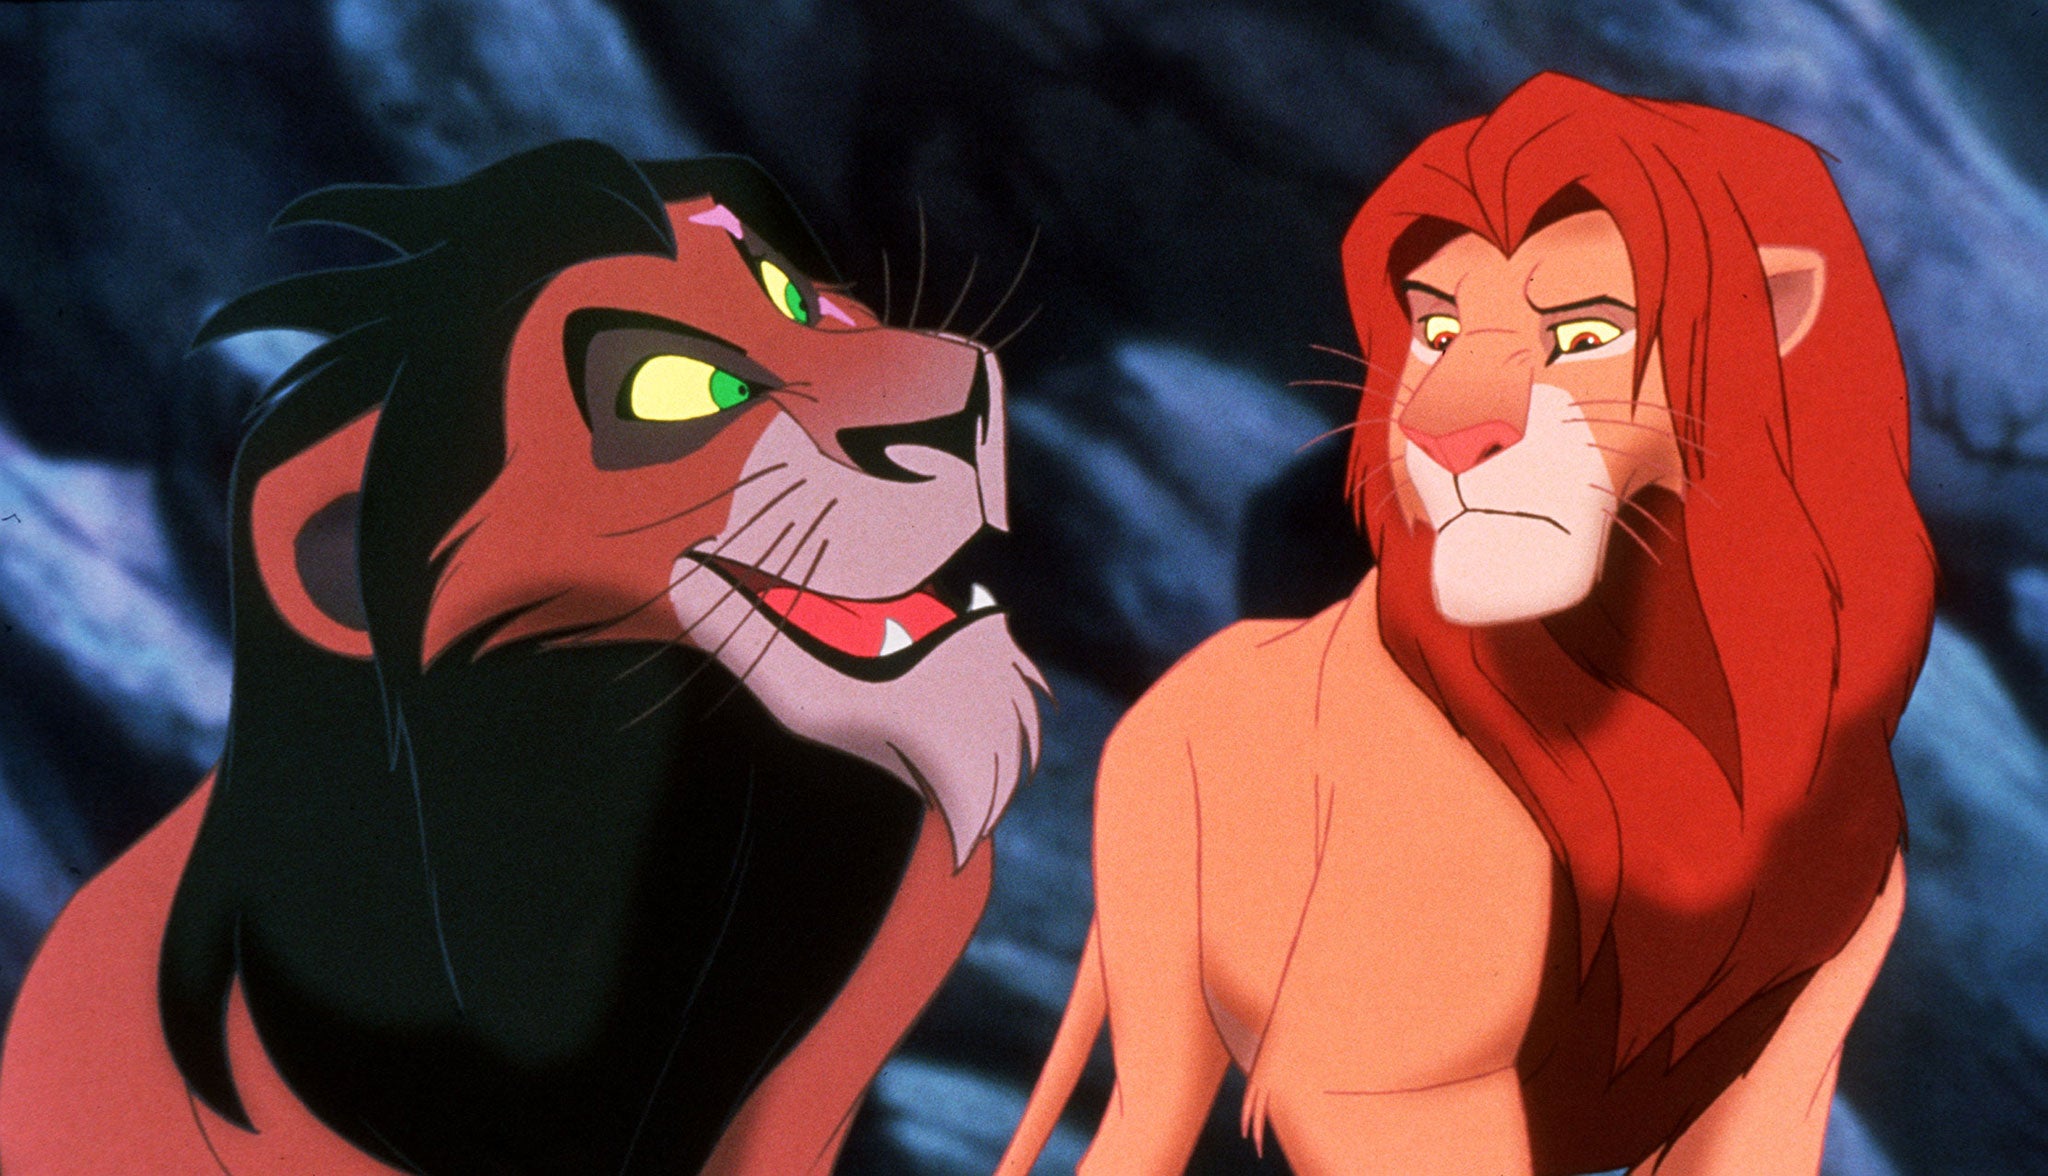 The Lion King spawned several spin-offs and a hit musical that's still running in the West End